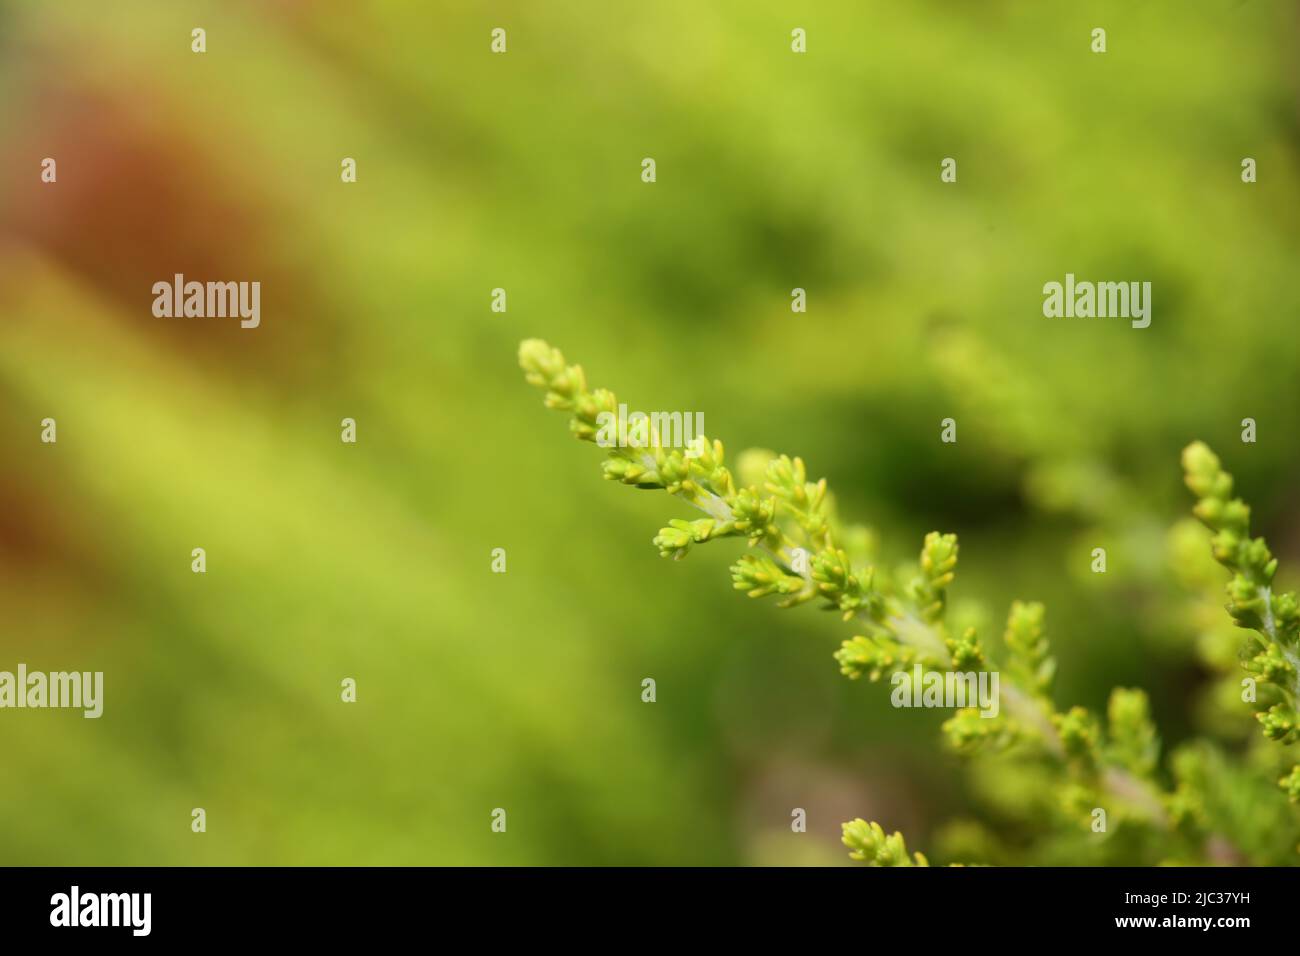 Green leaves close up botanical background erica sativa family ericaceae big size high quality modern prints Stock Photo